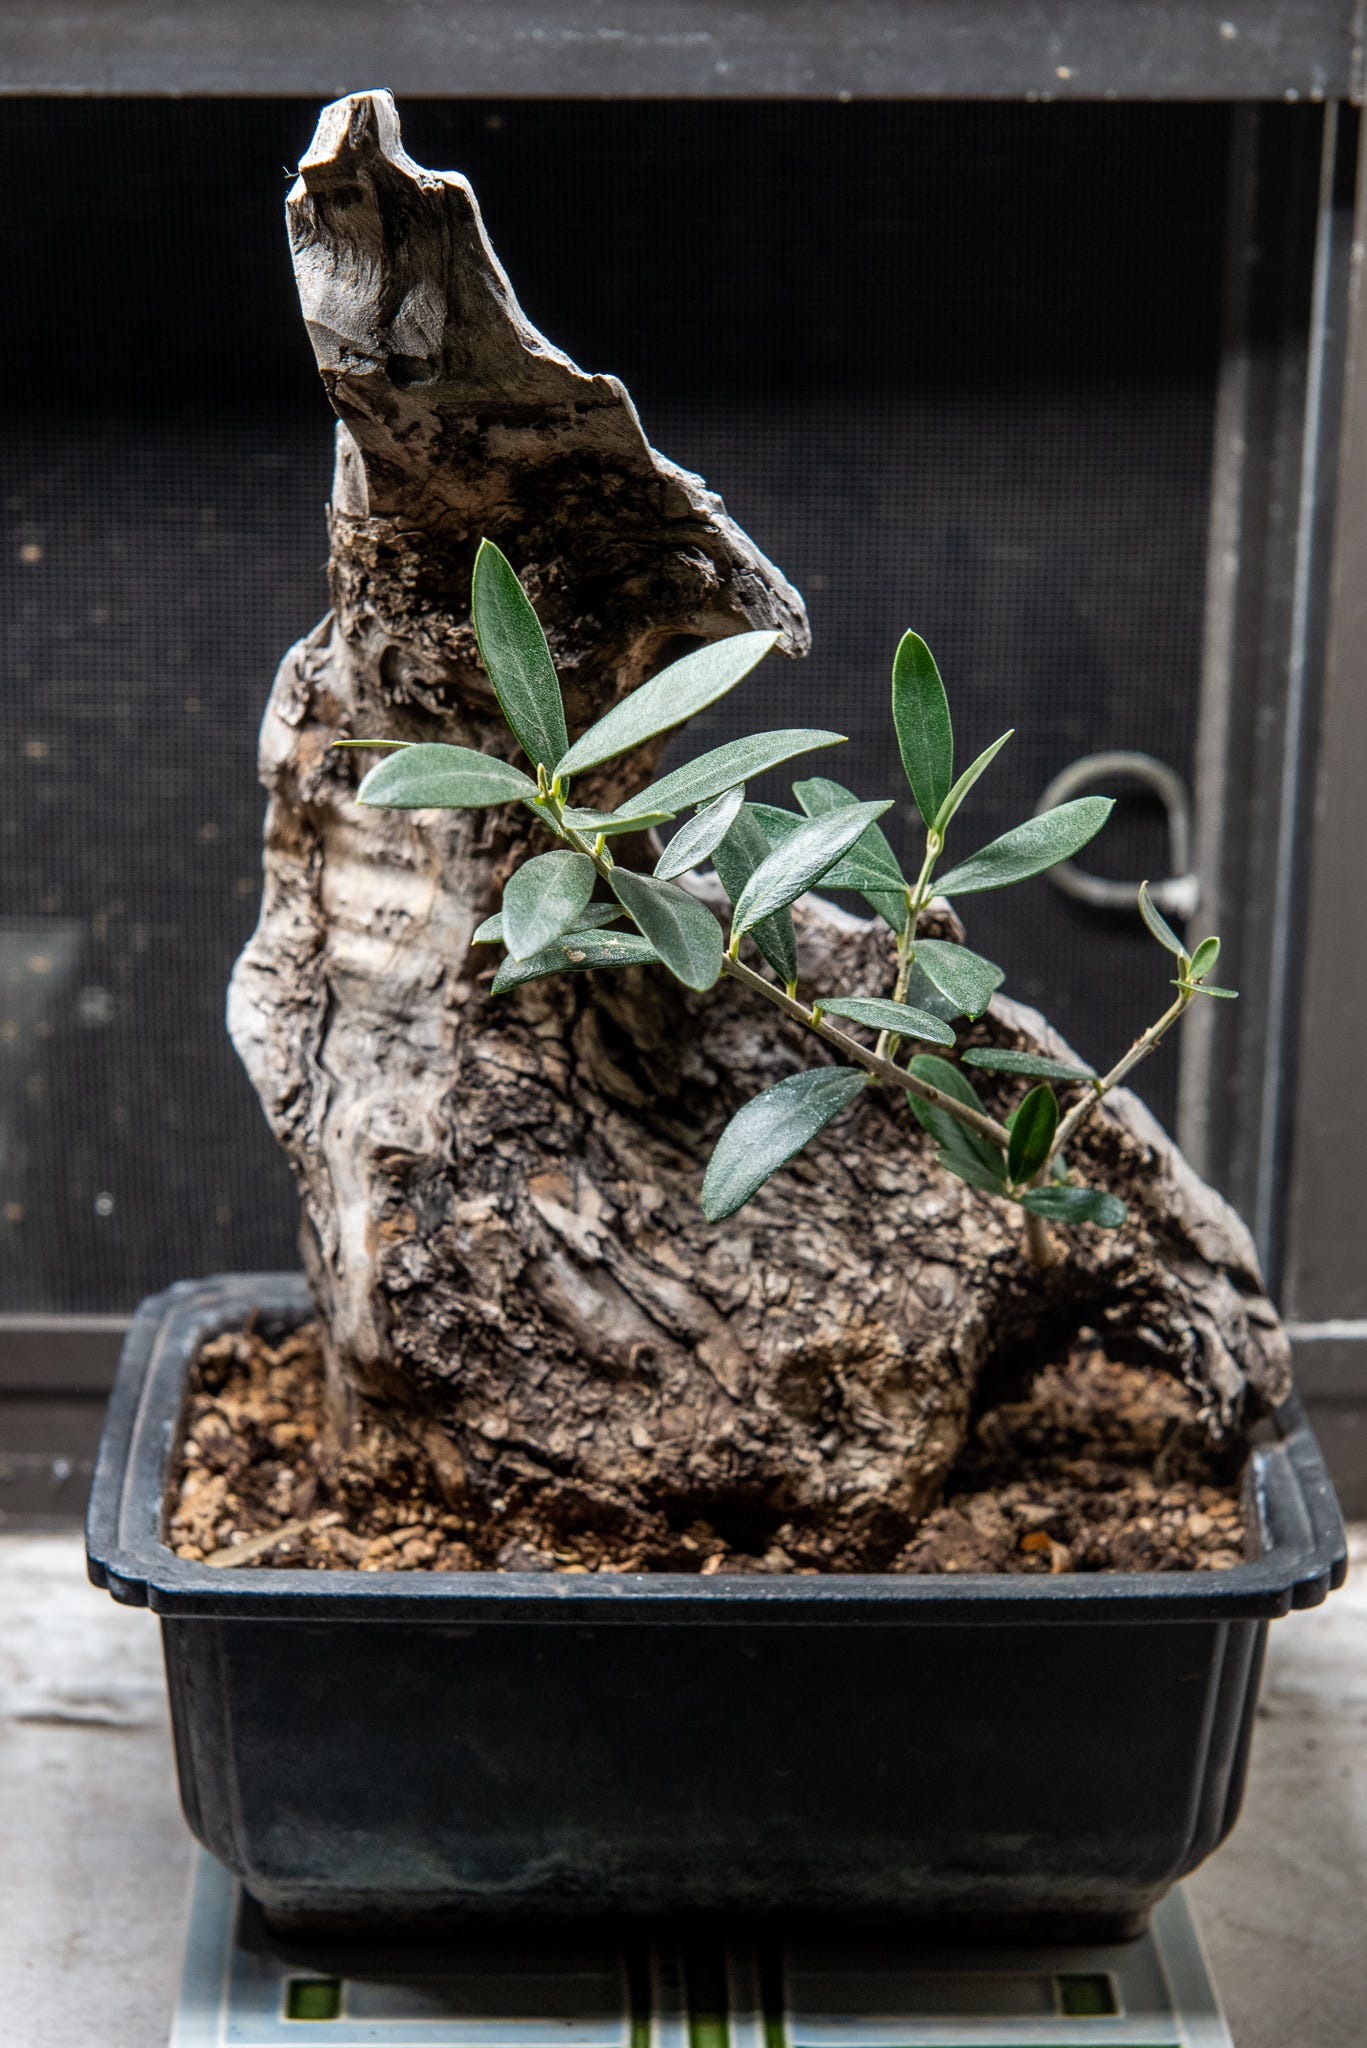 ID: Close up shot of an olive pre bonsai with a large crest of deadwood and thin twiggy growth.